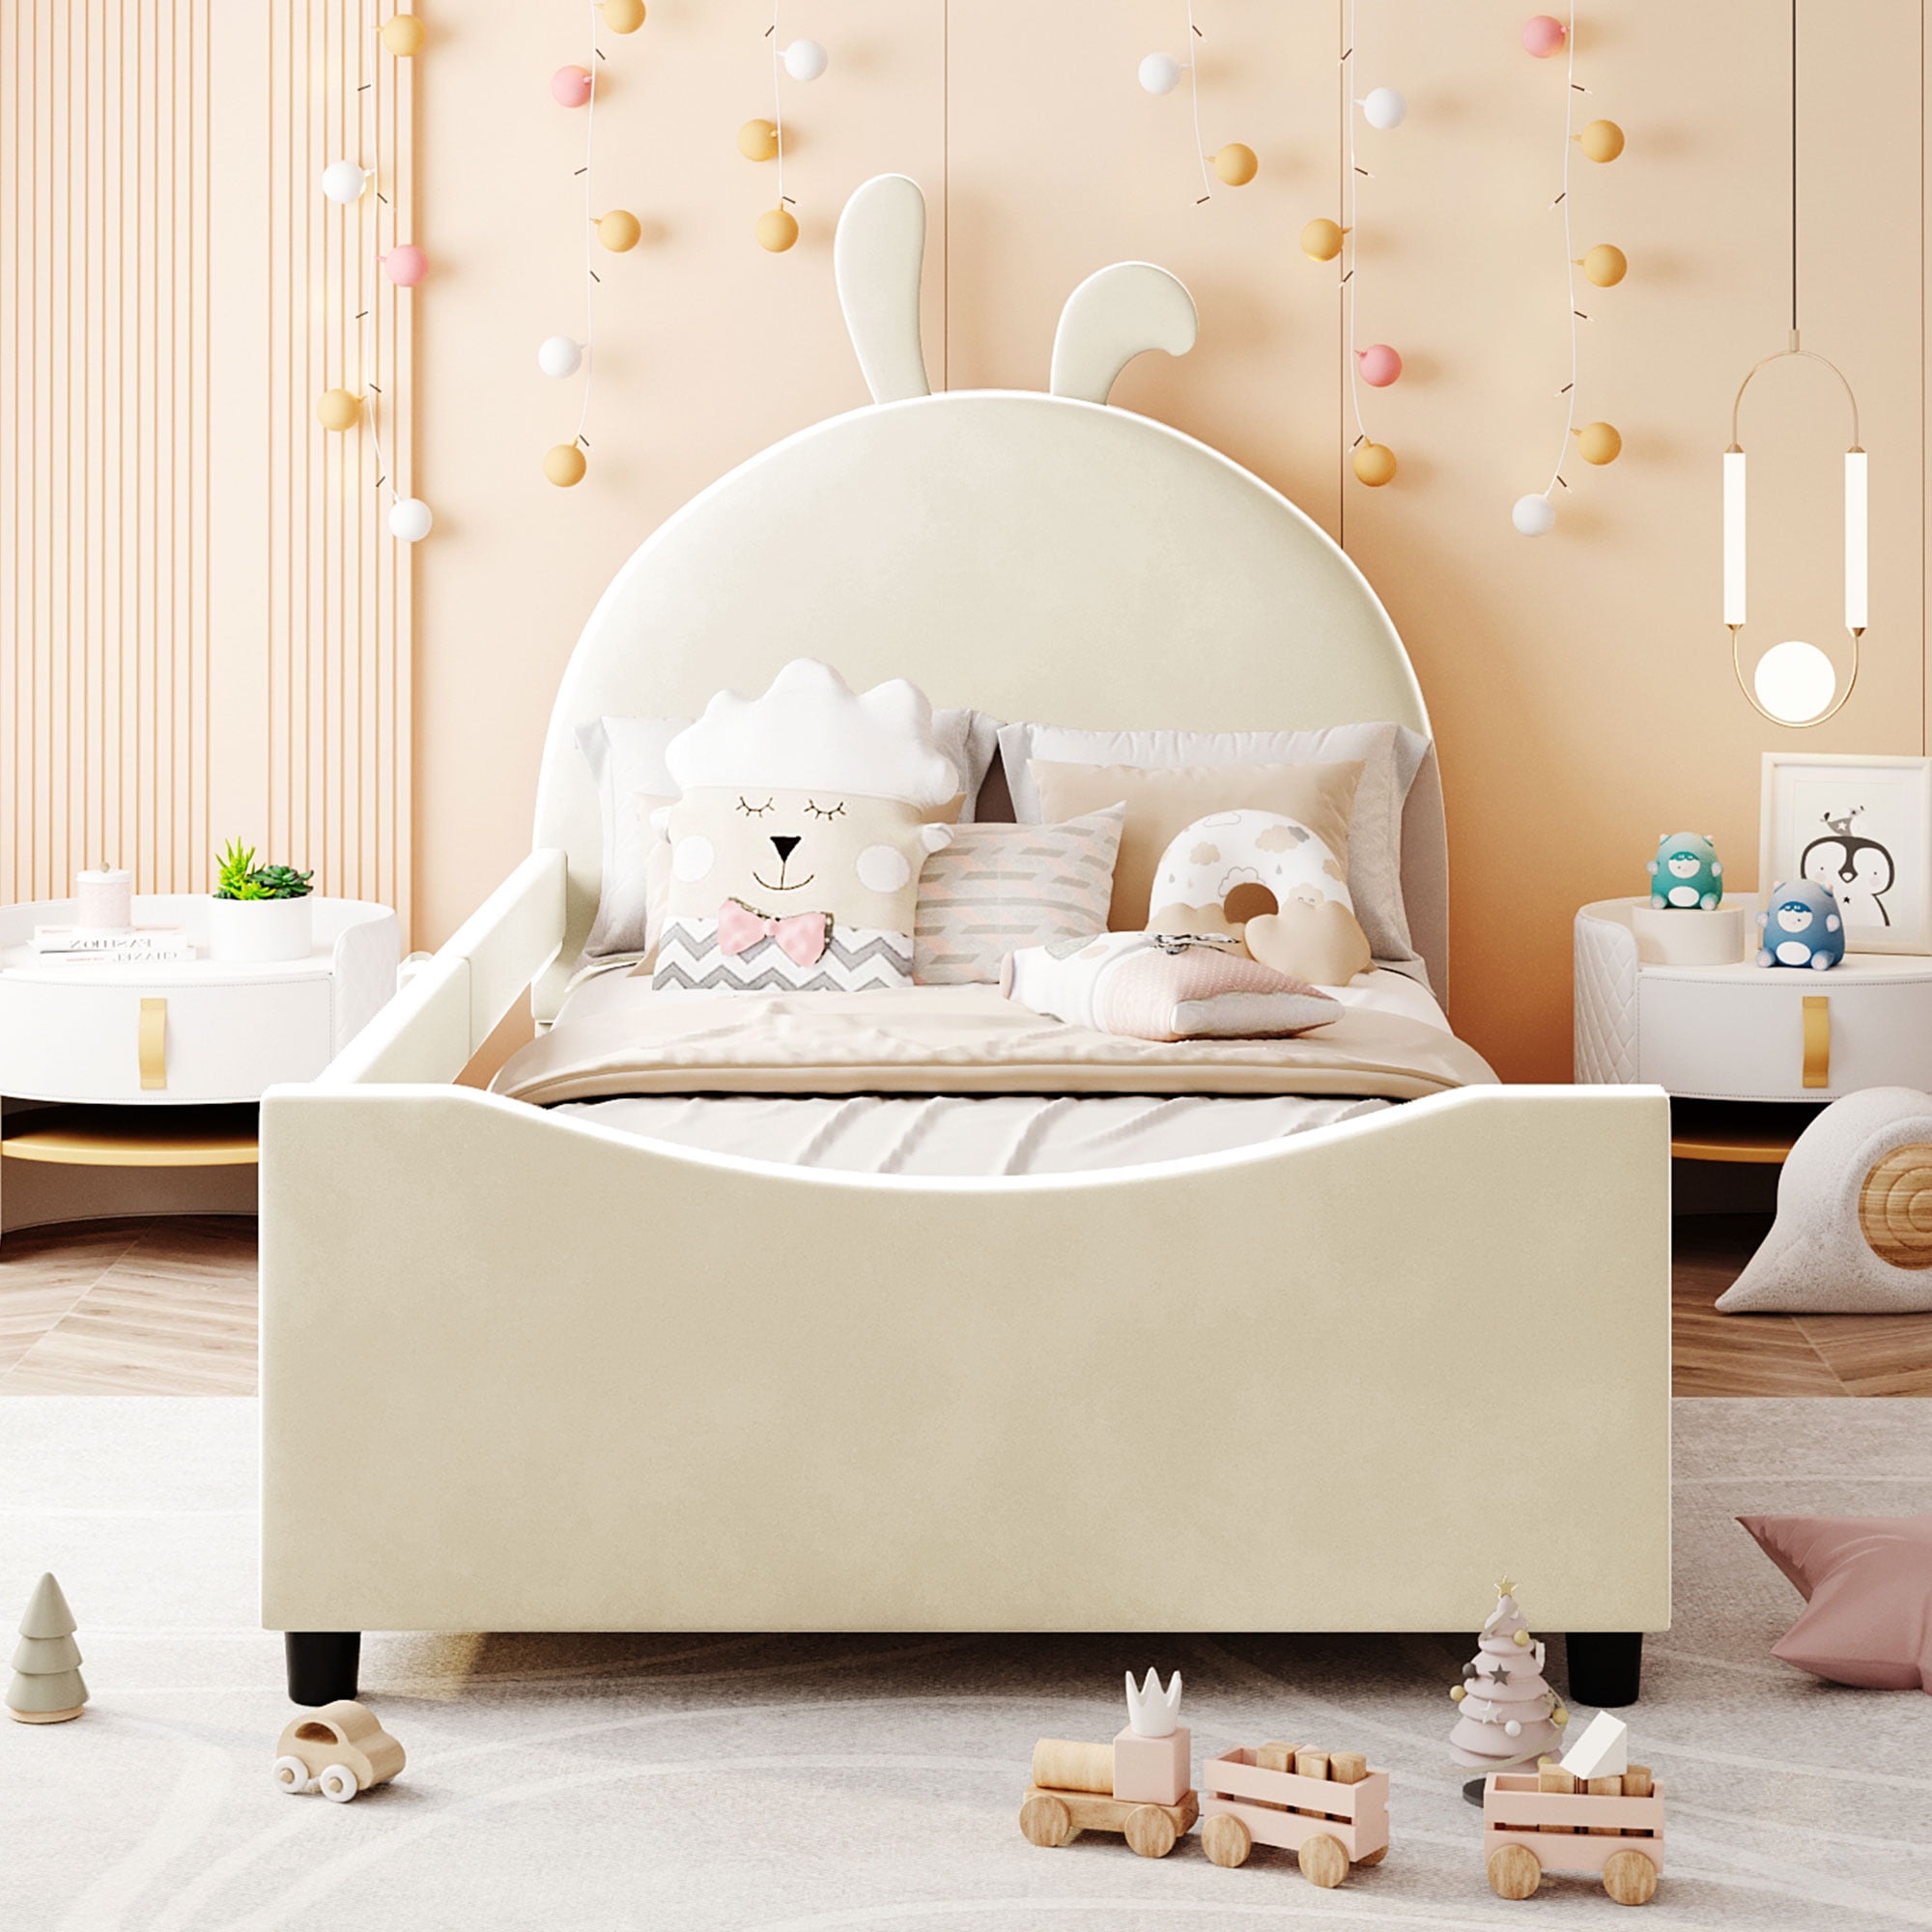 HSUNNS Twin Size Kids Upholstered Bed with Side Rail, Twin Size Upholstered  Platform Bed for Kids with Cute Rabbit Headboard, Low Profile Twin Bed for